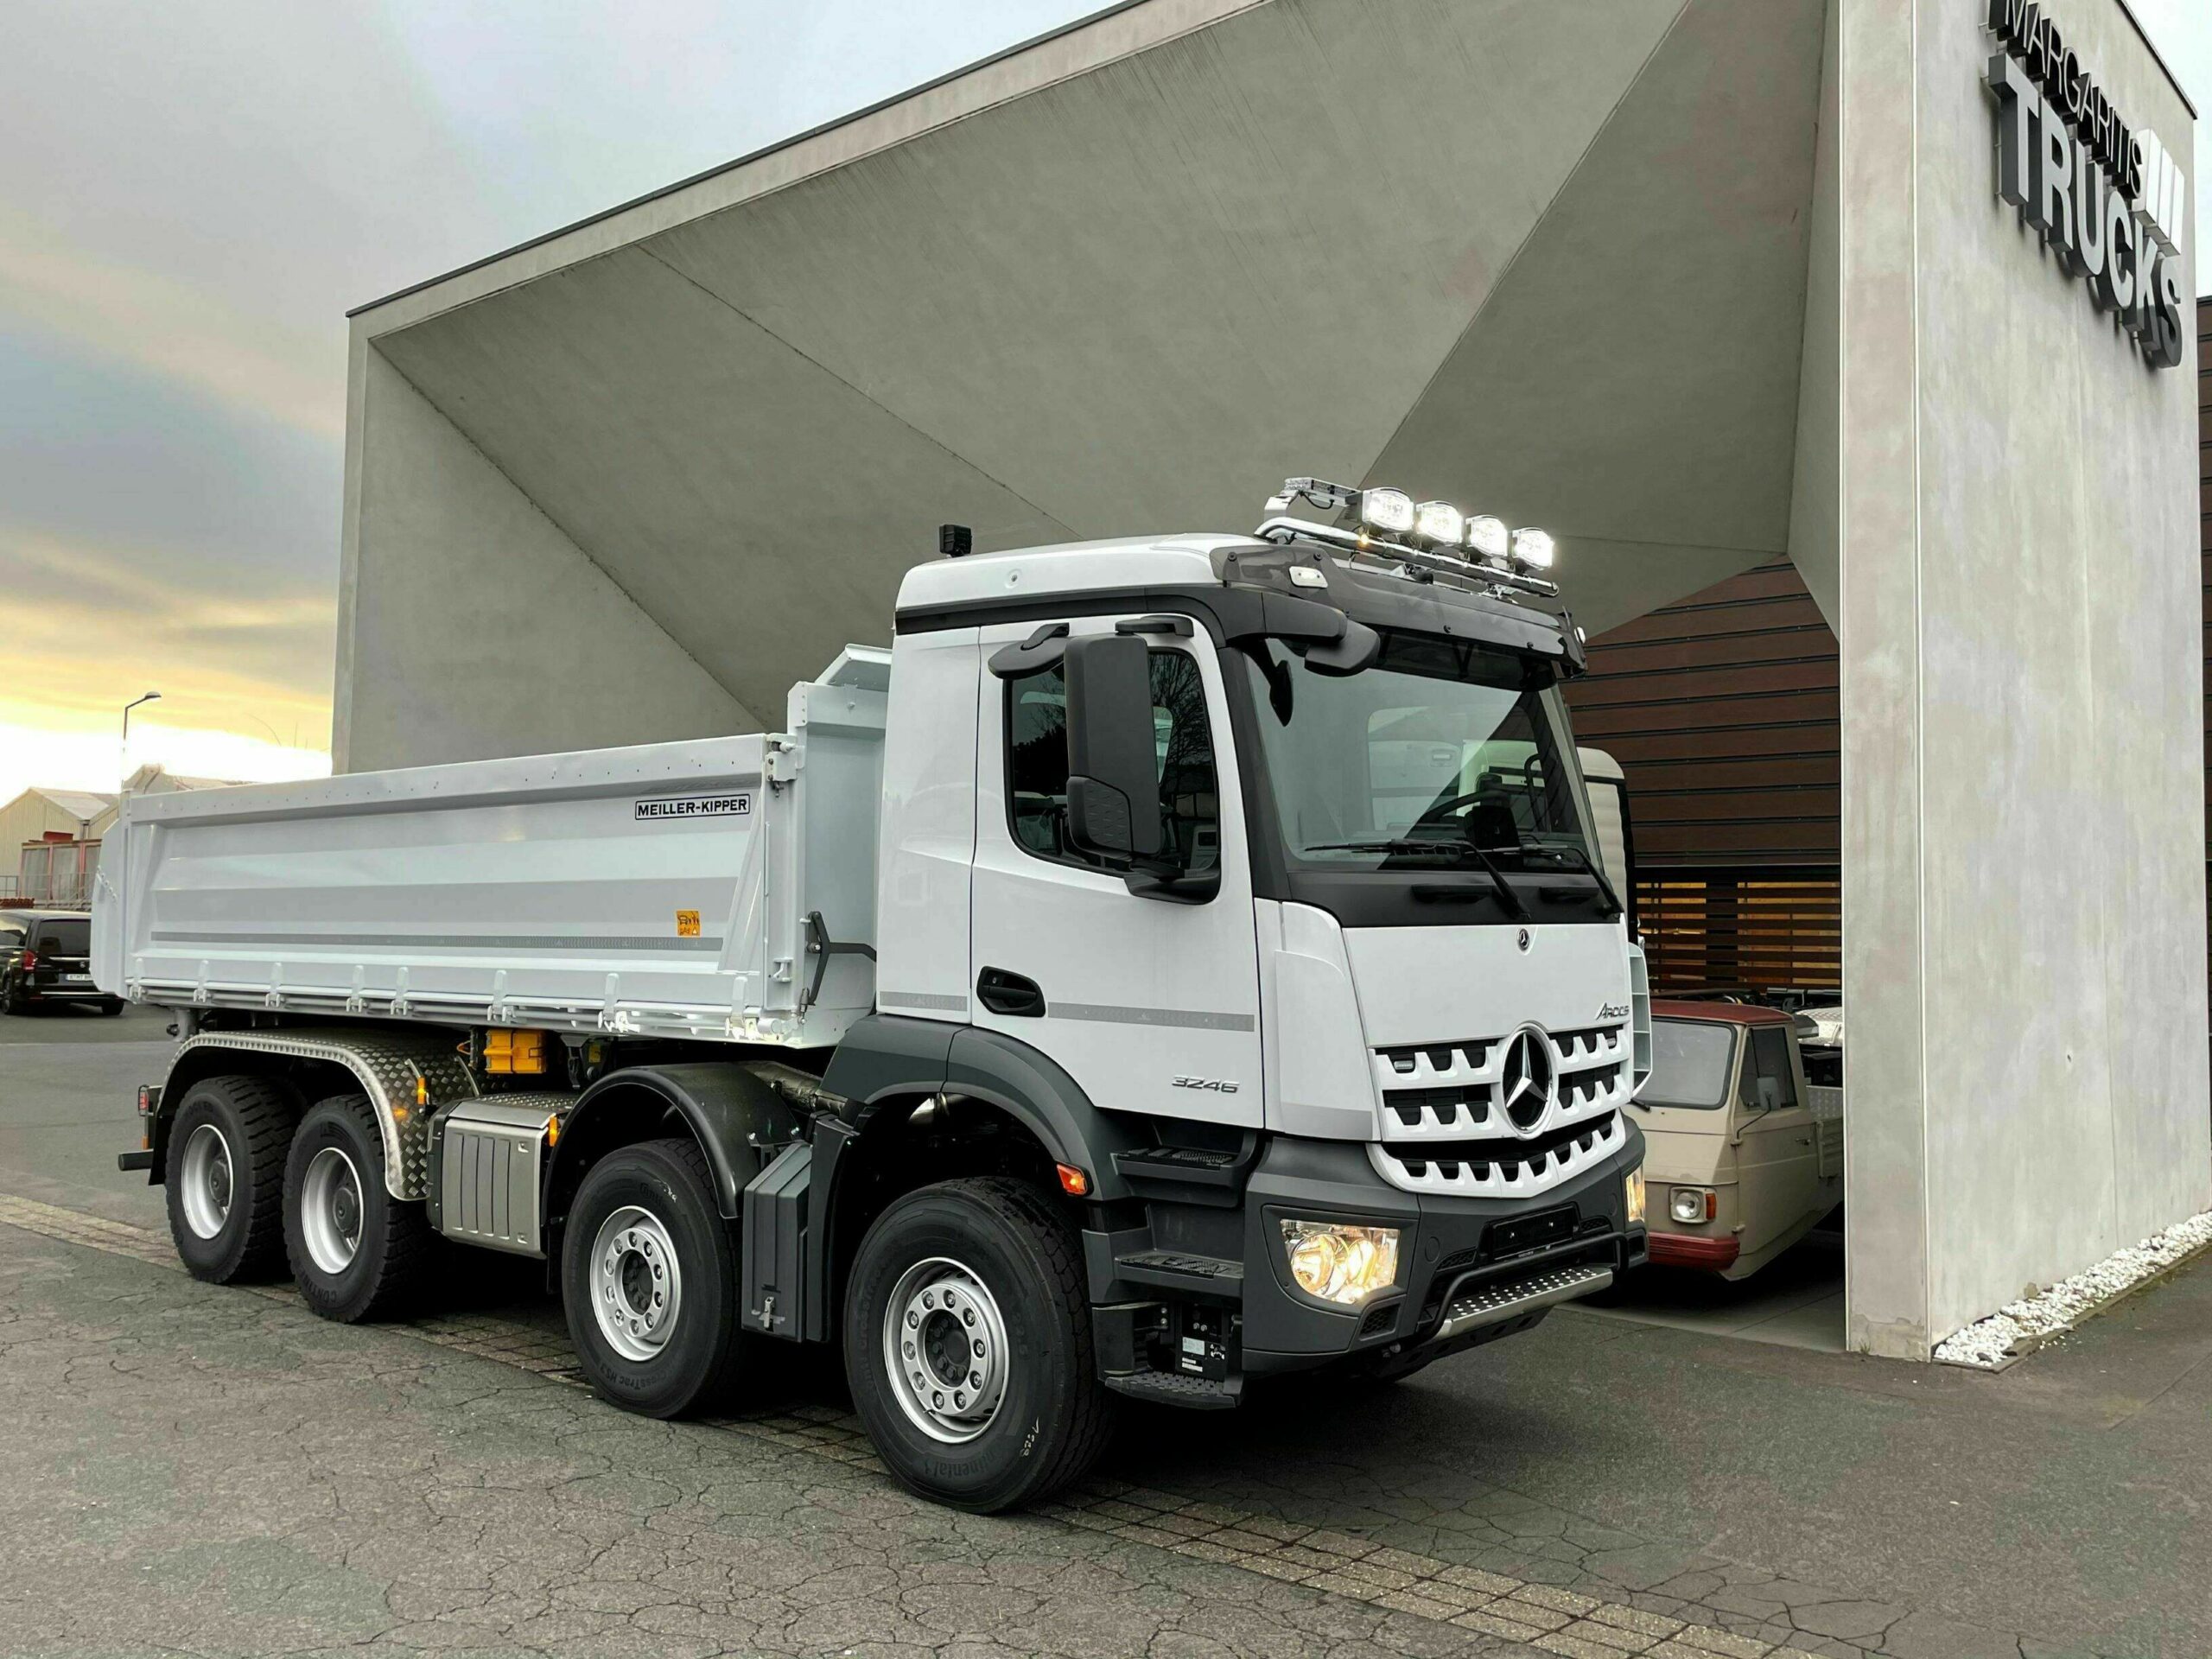 Tipper with special lights for Iceland